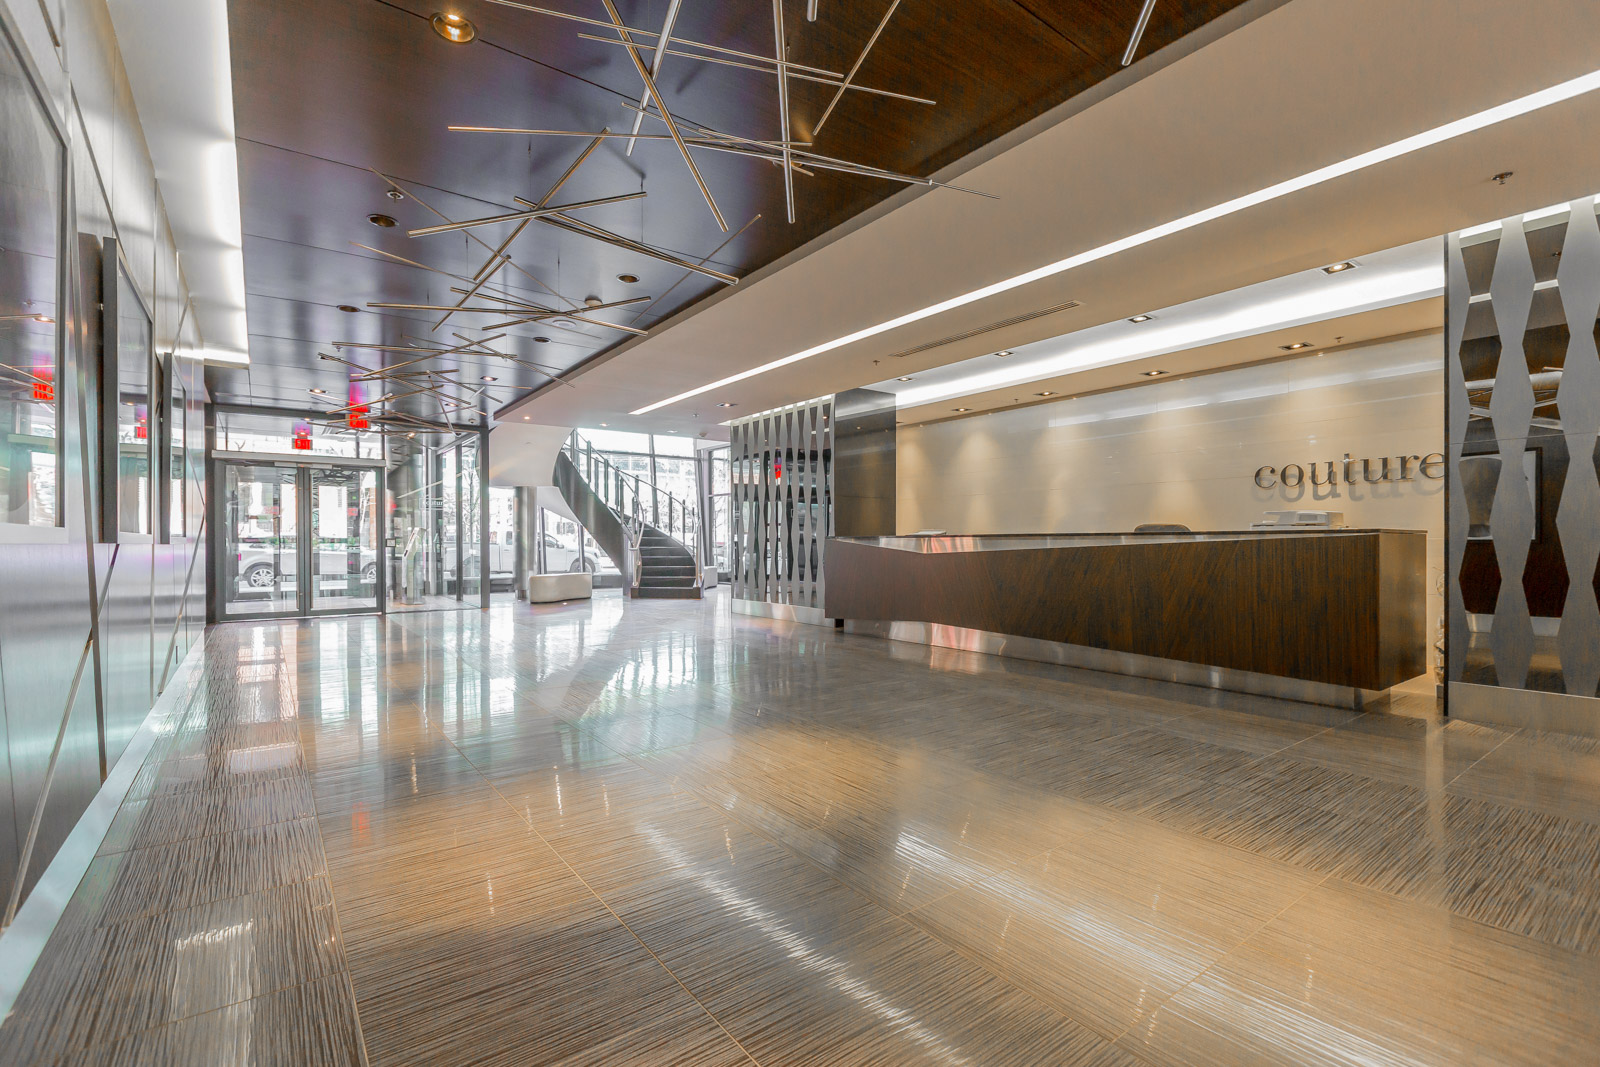 Photo of 28 Ted Rogers Way lobby. It looks so beautiful and artistic.